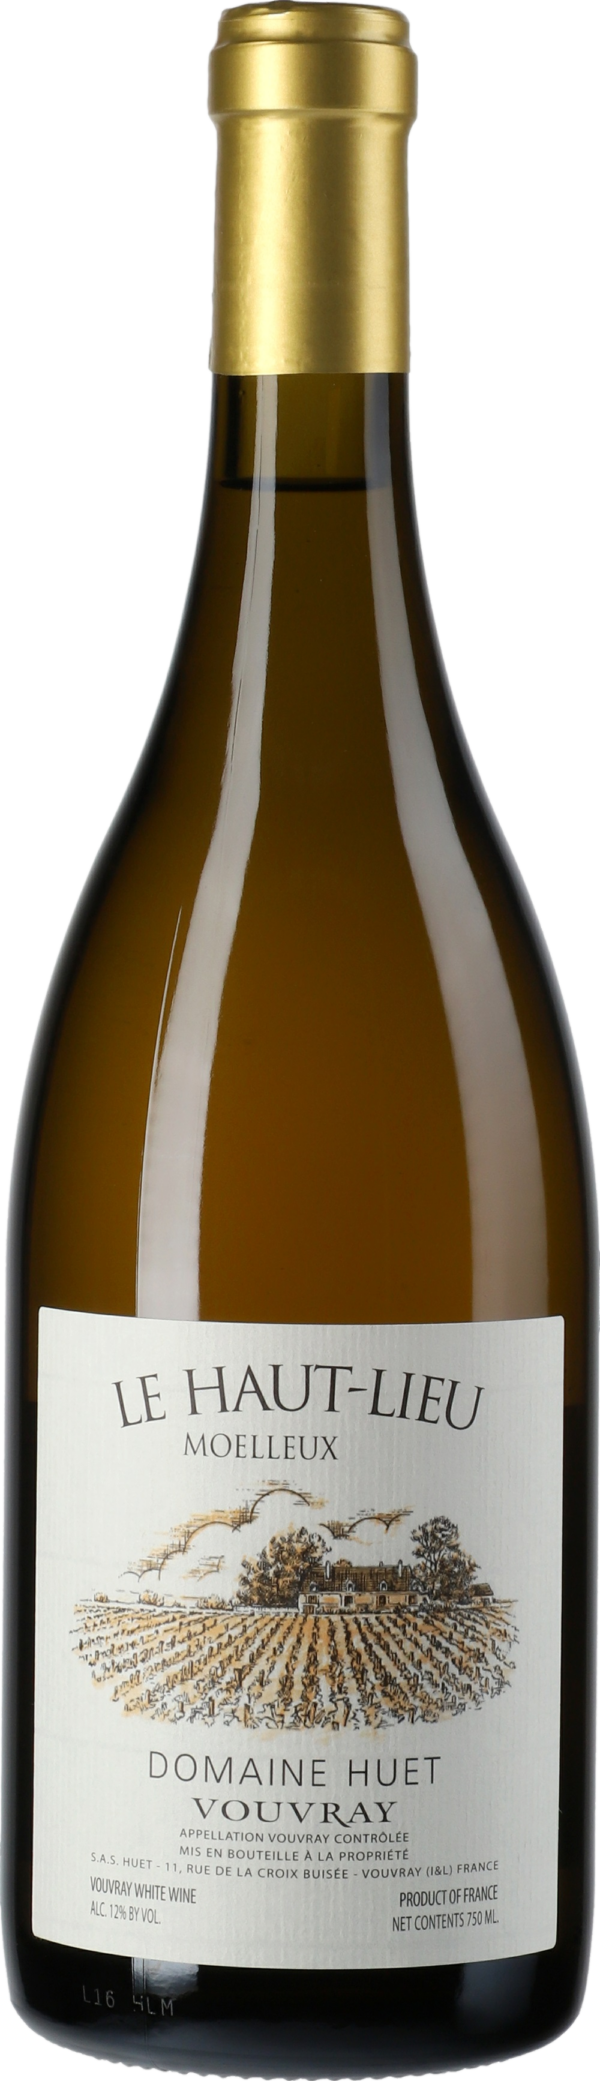 Product image of Domaine Huet Vouvray Le Haut Lieu Moelleux 2020 from 8wines